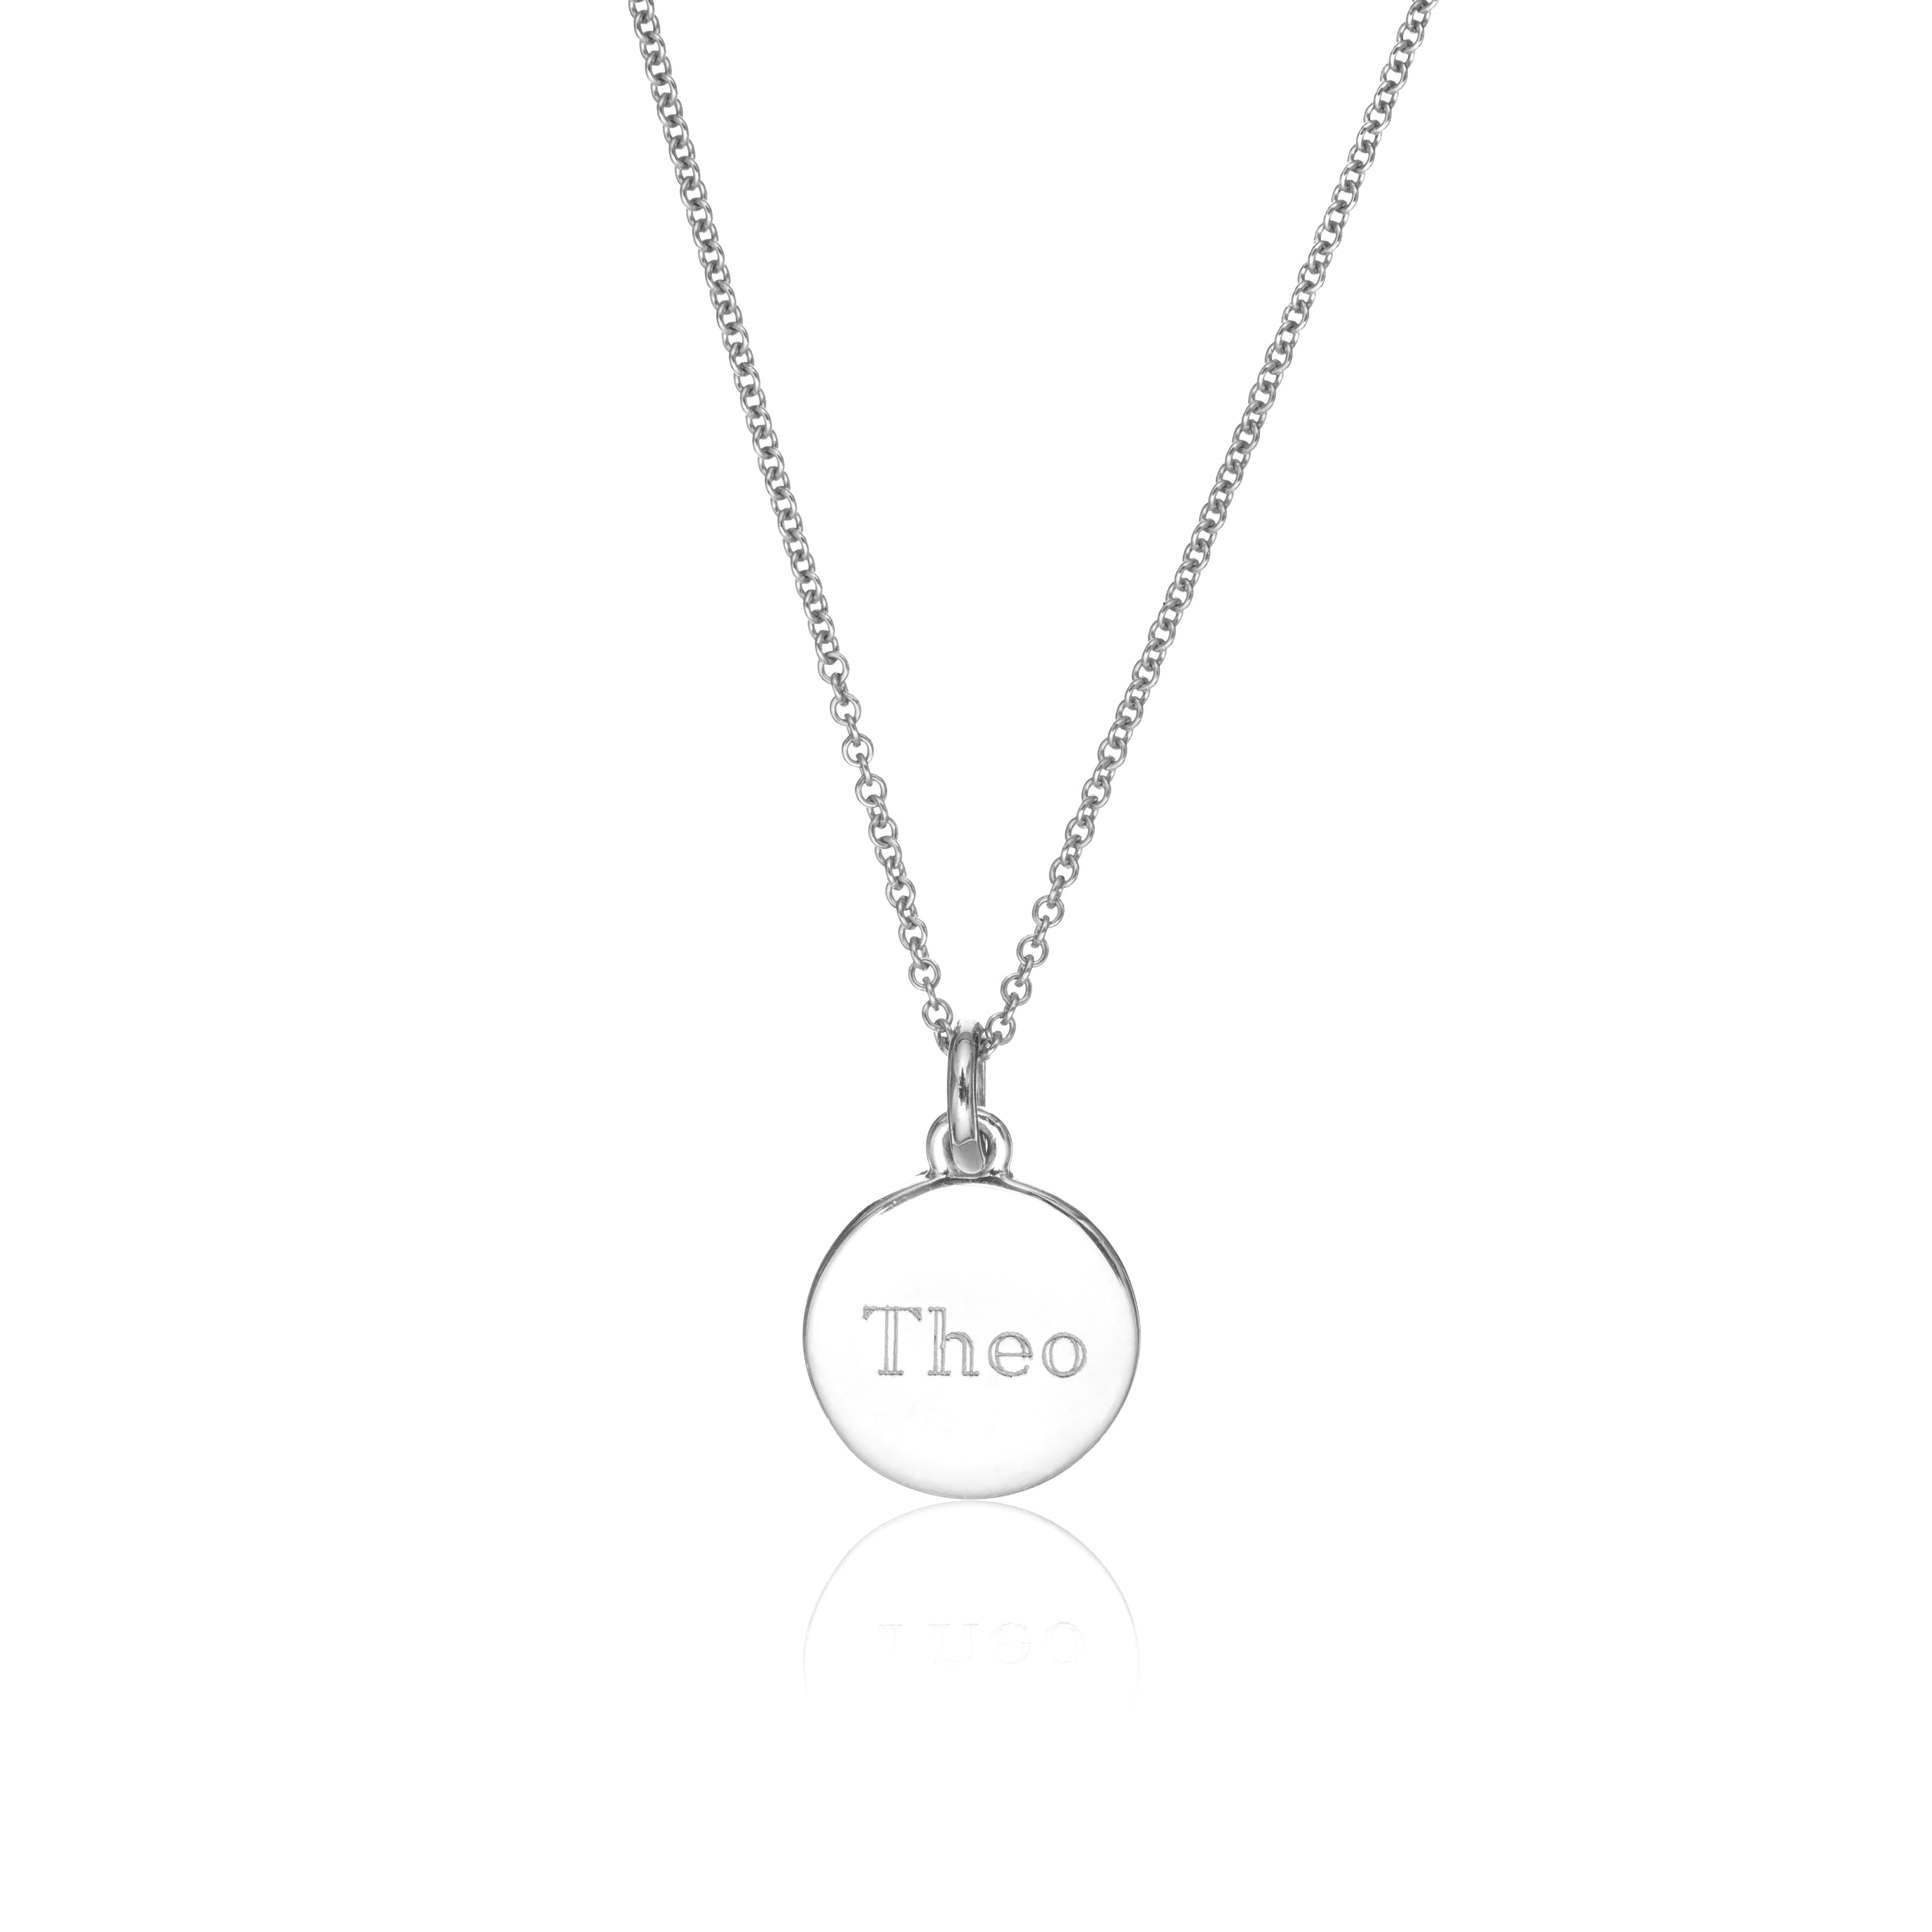 Silver small round engraved disc necklace with the name 'Theo' engraved on a white background